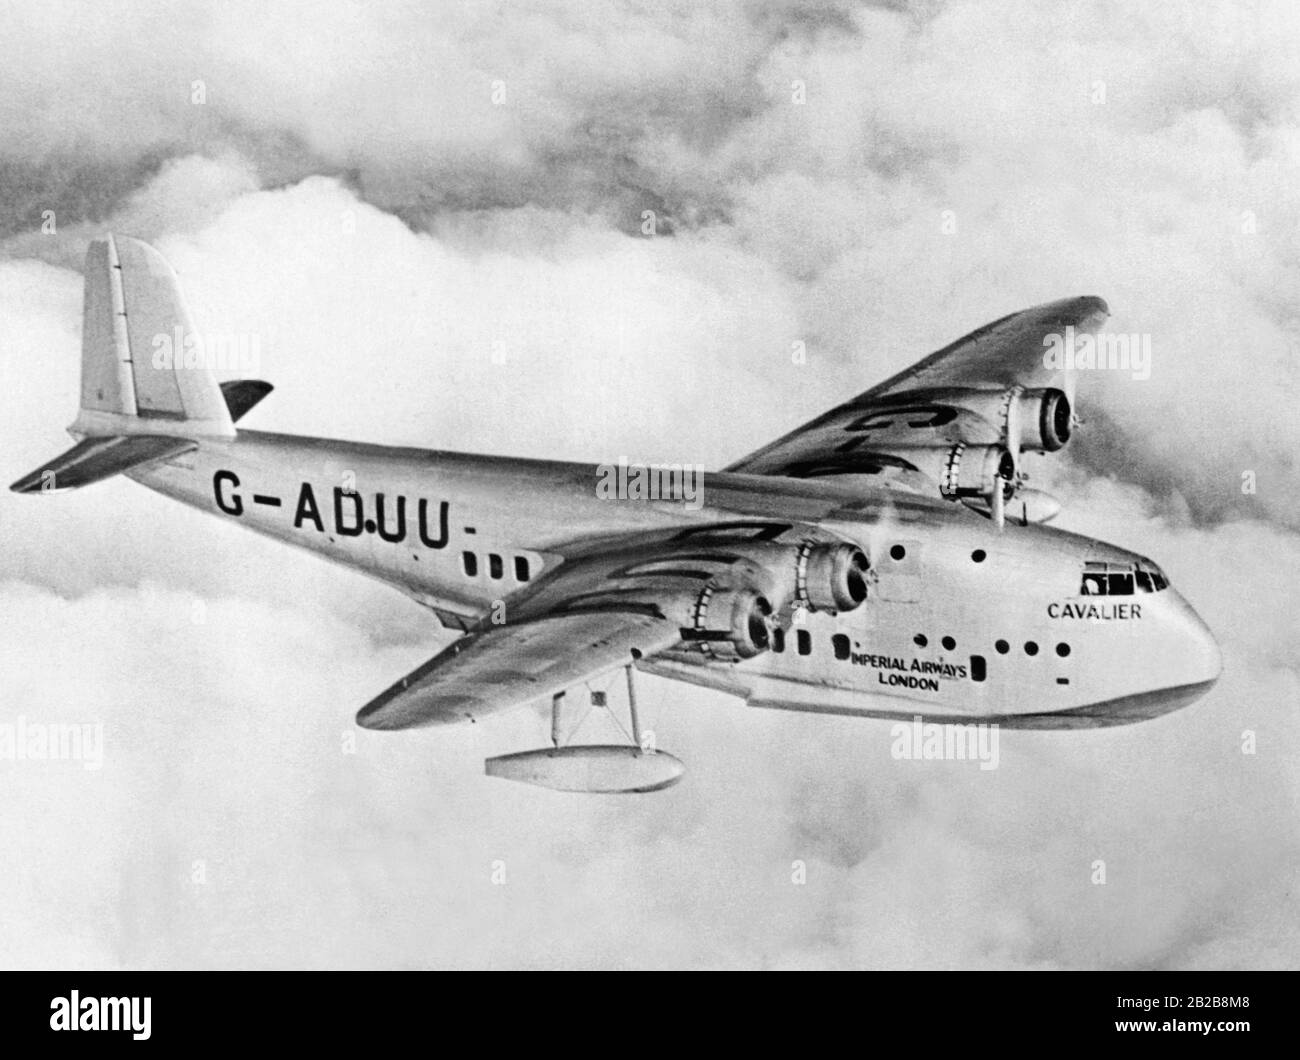 The Short Empire with the registration number G-ADUU and the name 'Cavalier' sank on 21.1.1939 in the Atlantic Ocean after all four engines had failed. Three persons died. Stock Photo